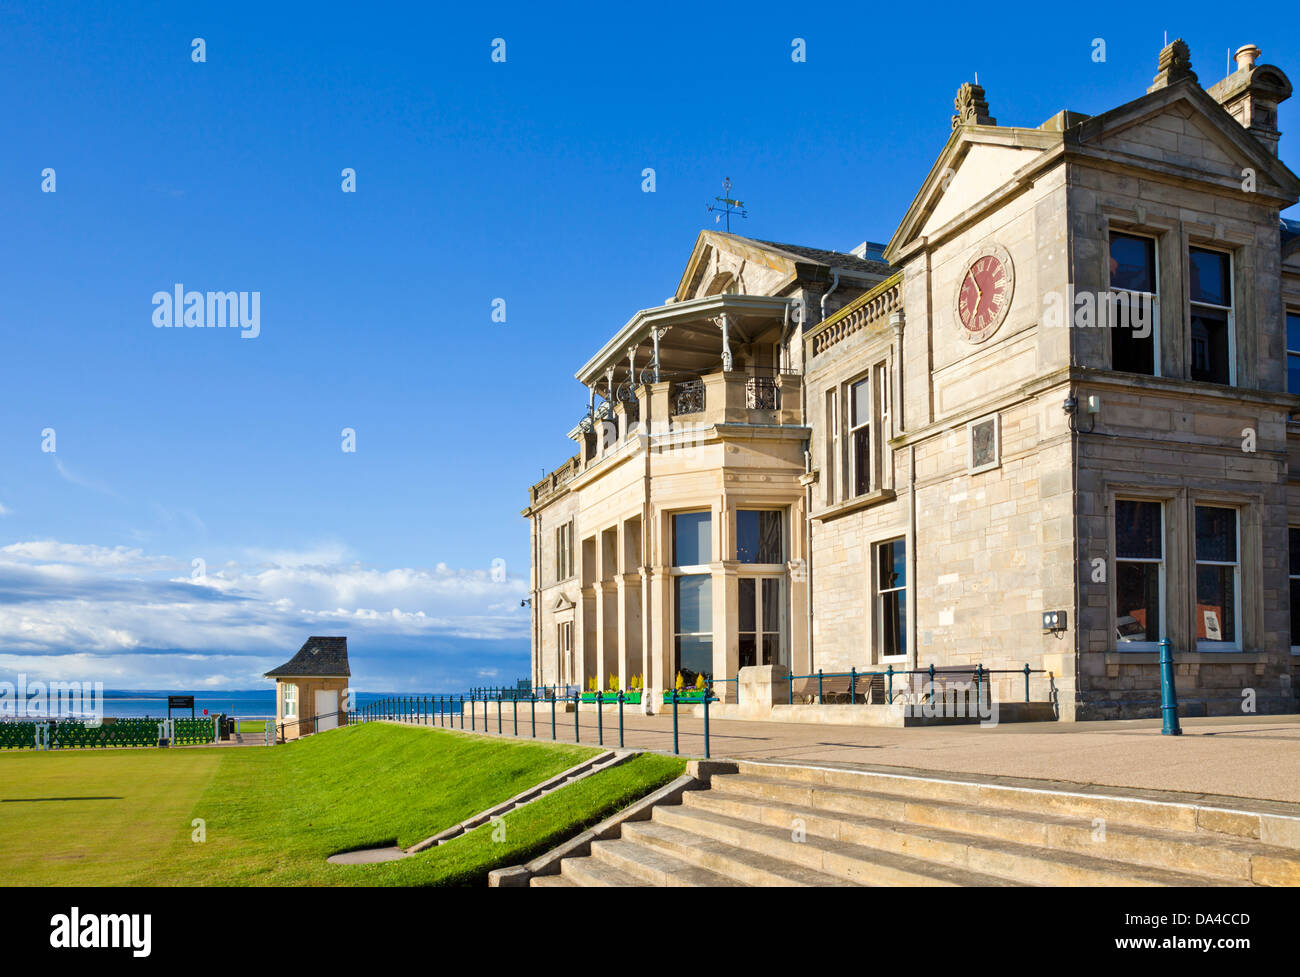 St Andrews Scotland St Andrews Golf The Royal and Ancient Golf Club of St Andrews Golf Course and Club House St Andrews Fife Scotland UK GB Europe Stockfoto